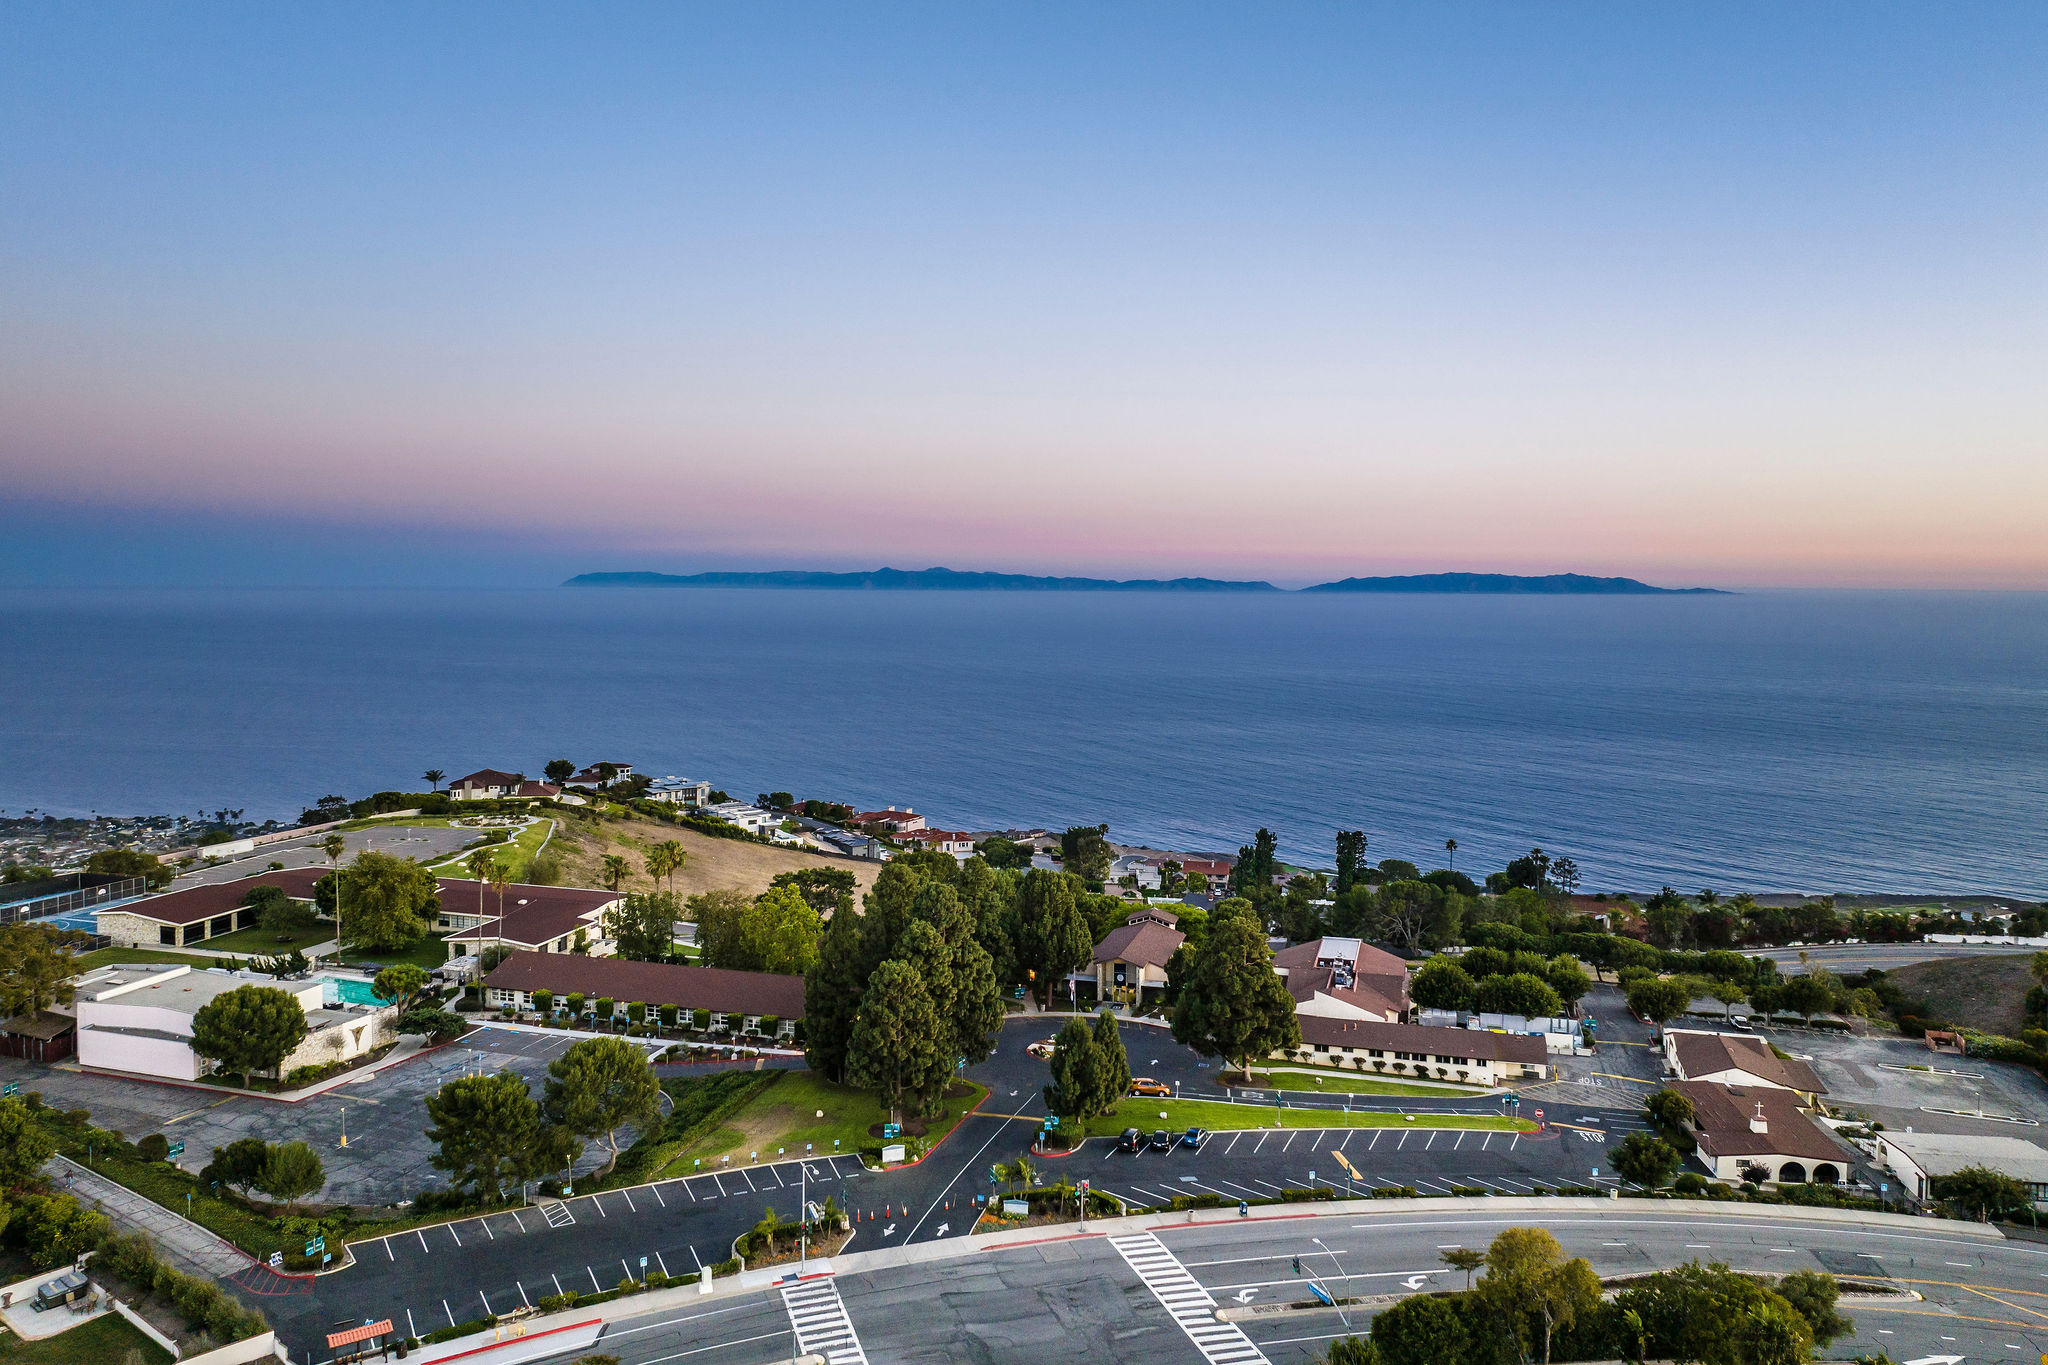 An aerial view of a parking lot lined with trees and reddish roofs, looks over the ocean as the sun sets. 